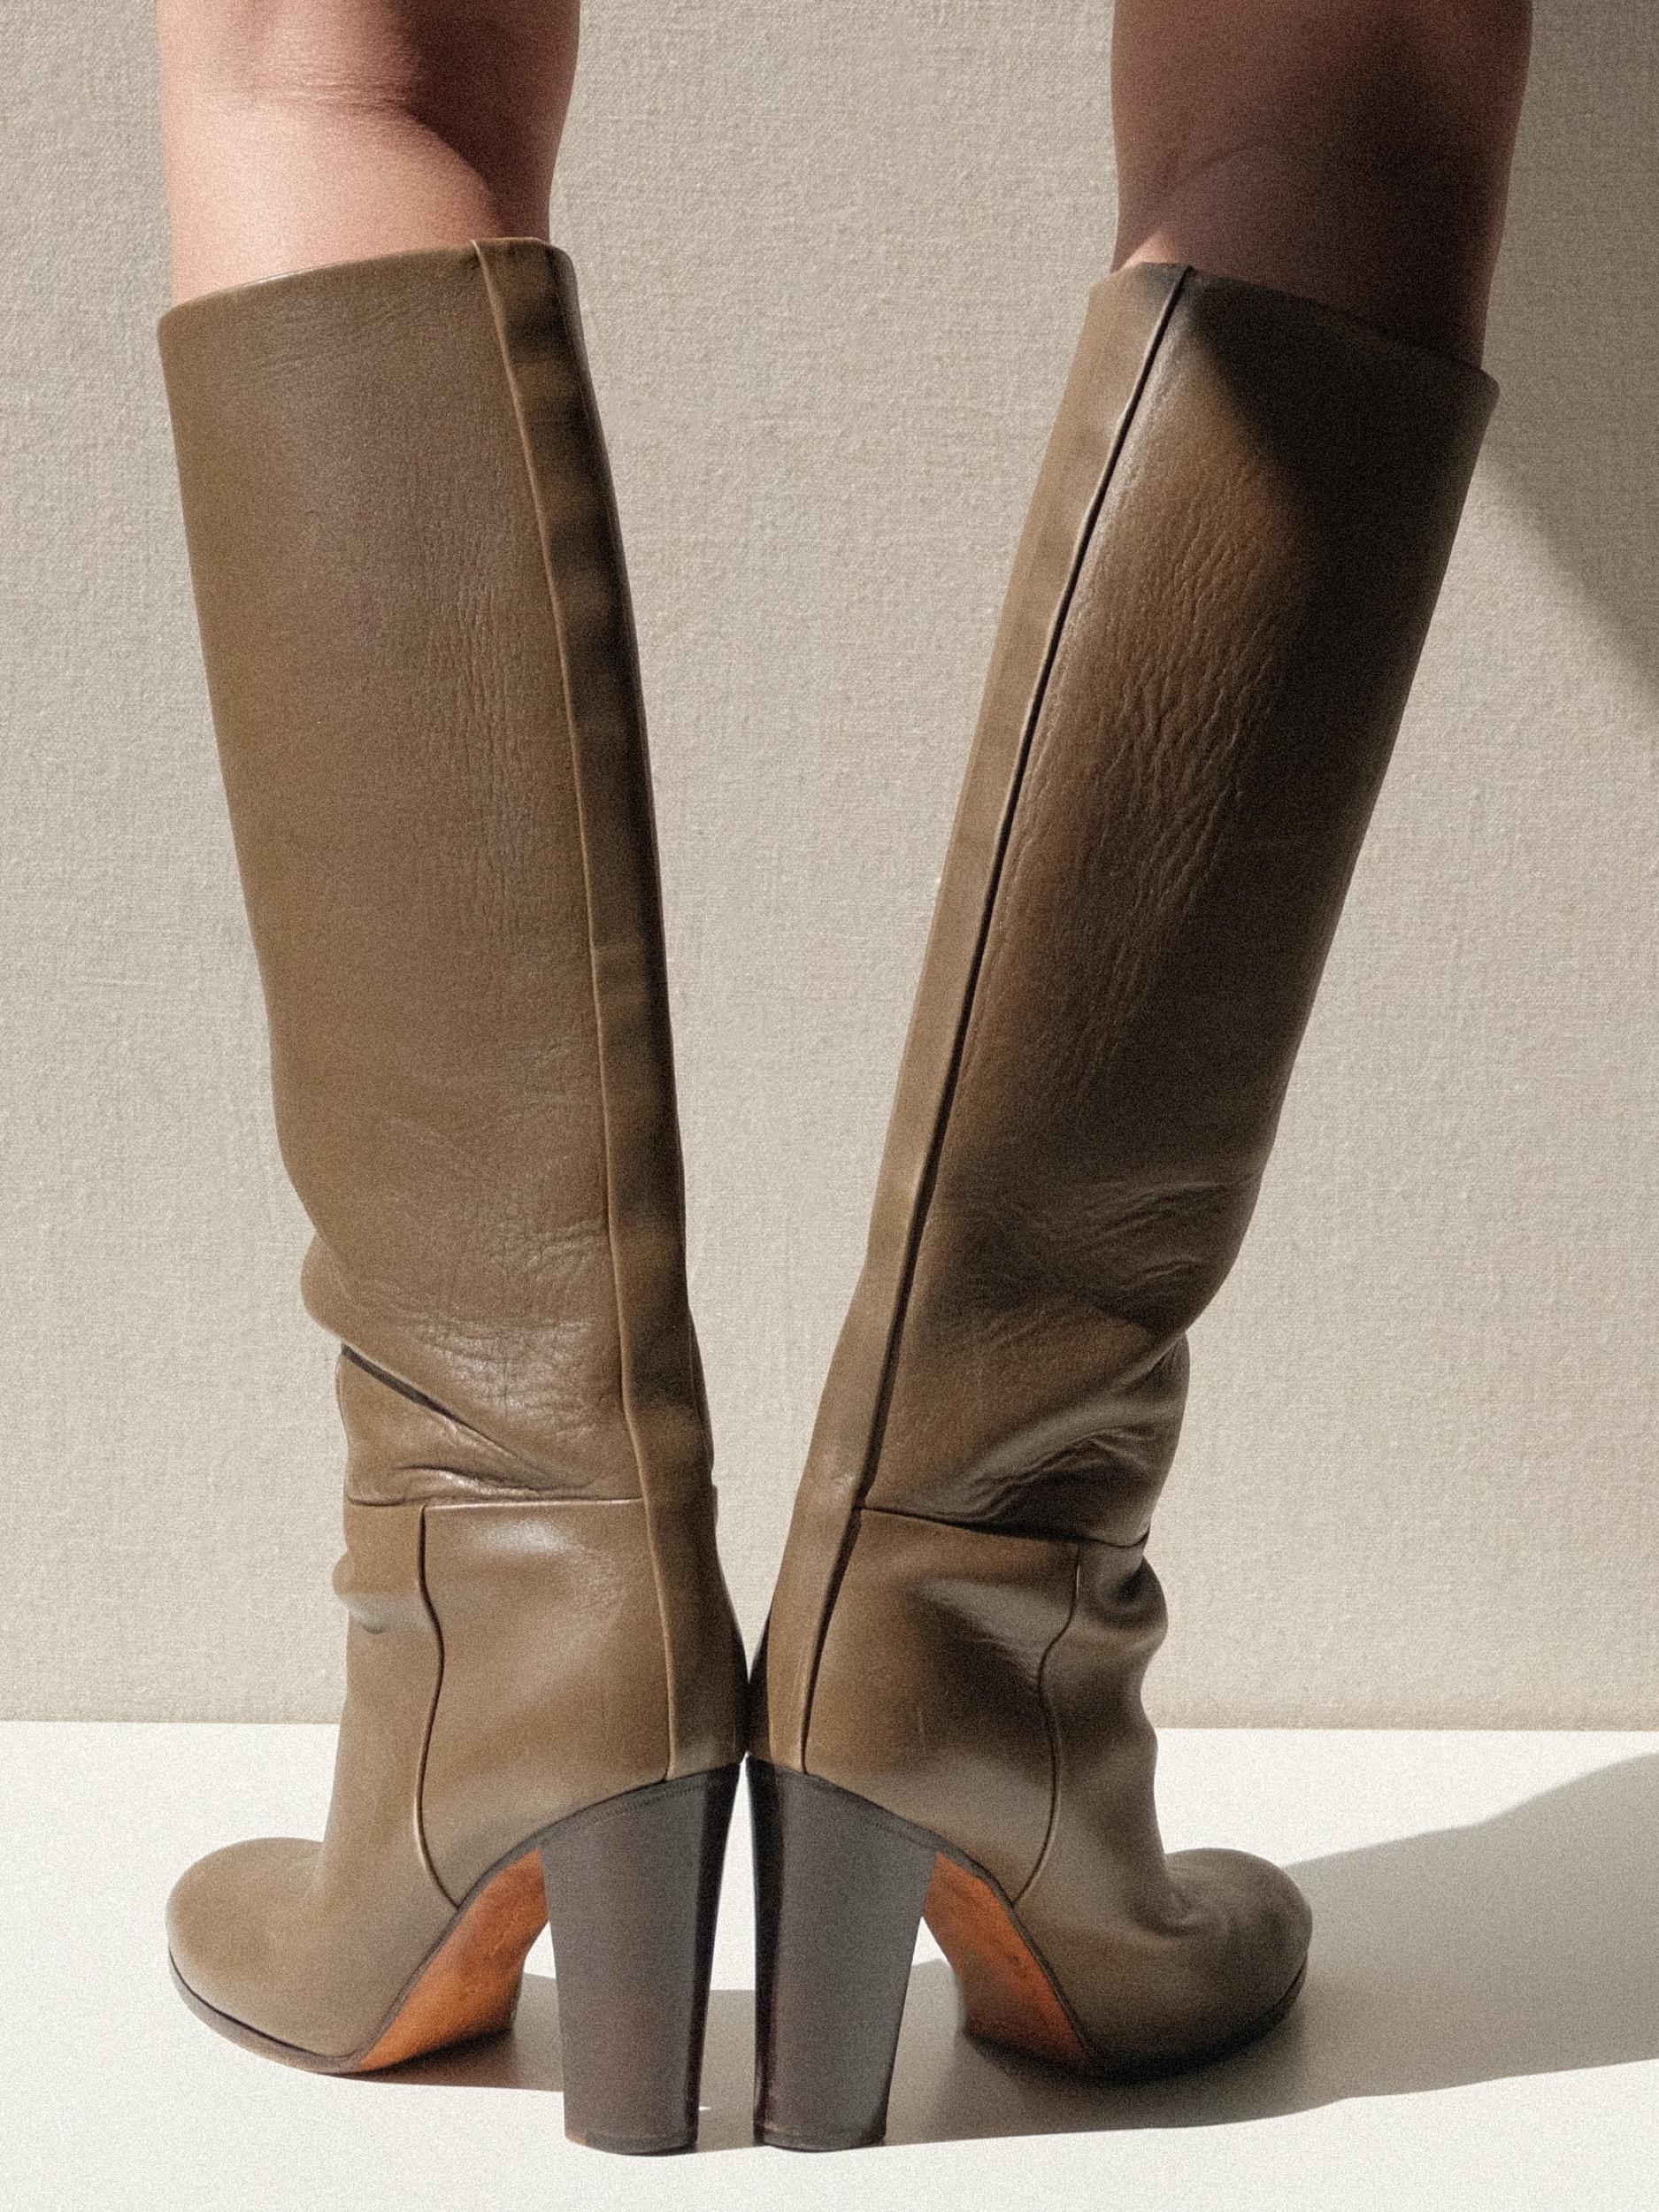 Green Leather Céline Phoebe Philo Knee High Boots 38 For Sale 6